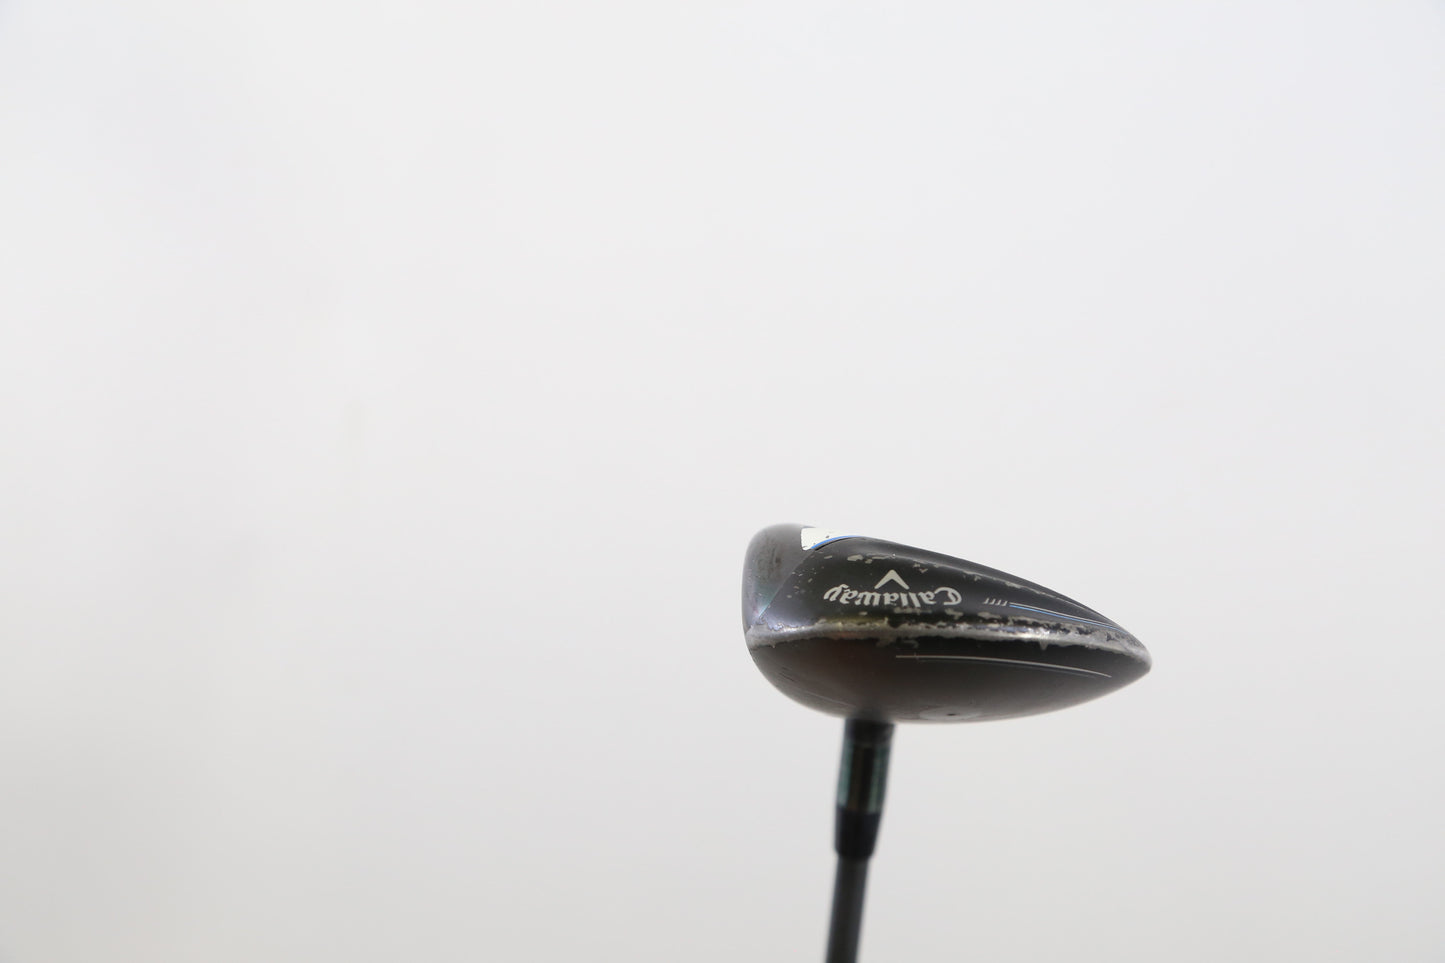 Used Callaway XR 16 7-Wood - Right-Handed - 21 Degrees - Ladies Flex